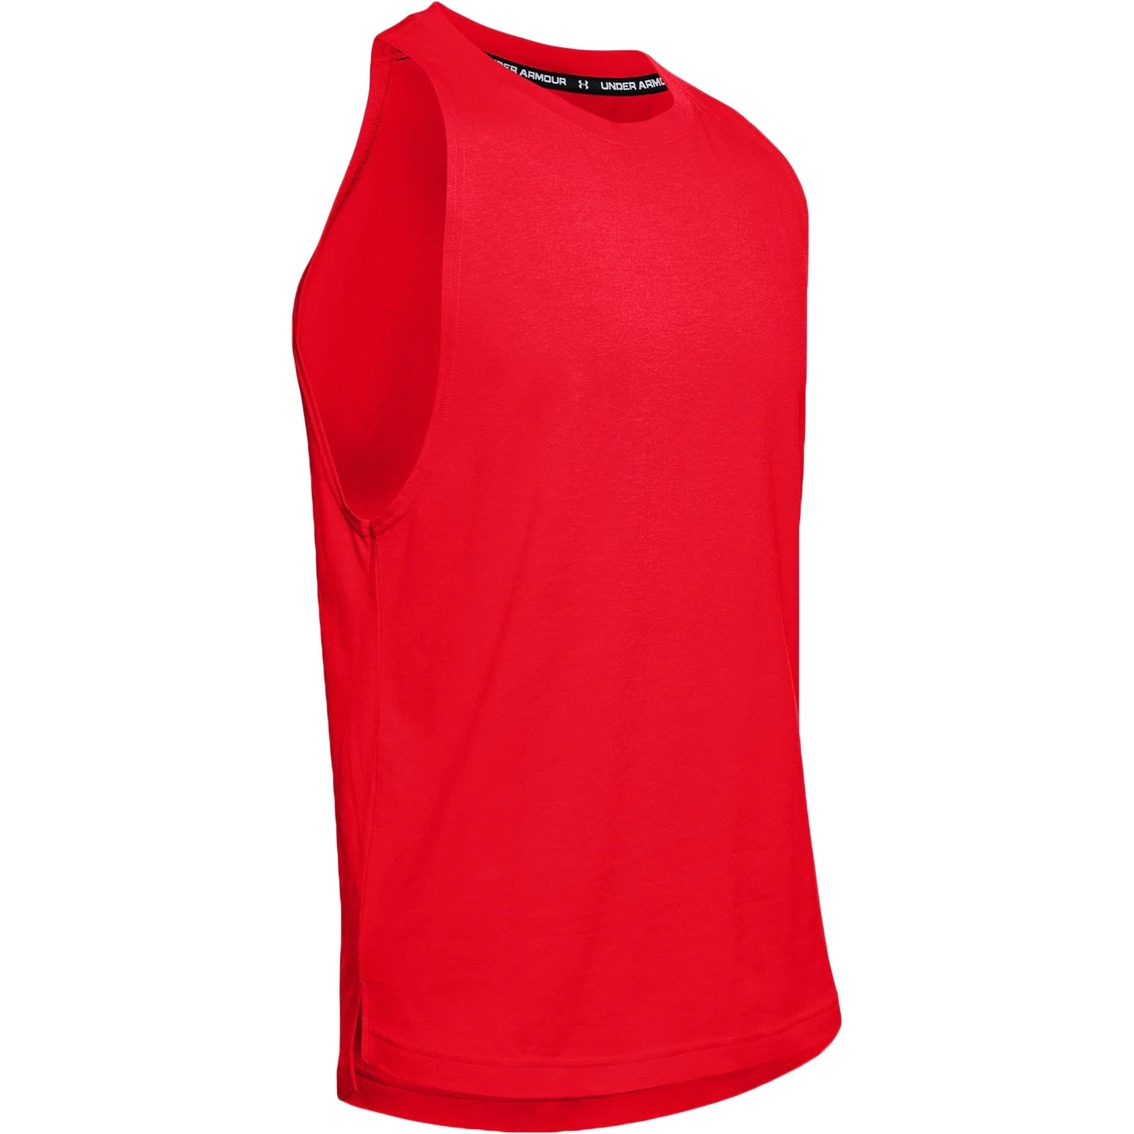 Under Armour Baseline Tank Top - Image 5 of 6